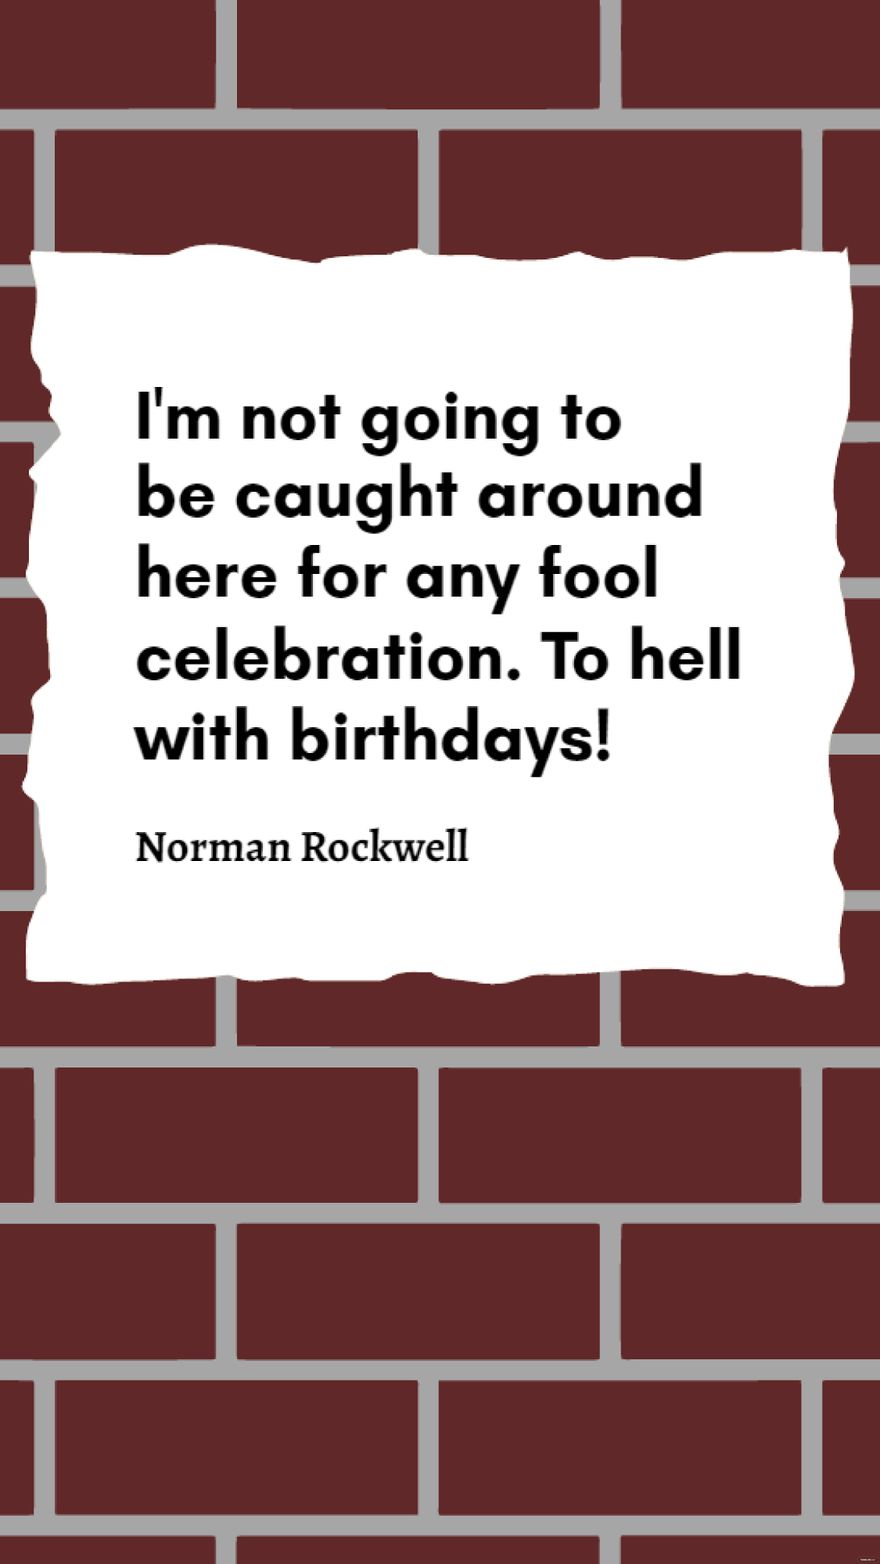 Norman Rockwell - I'm not going to be caught around here for any fool celebration. To hell with birthdays!